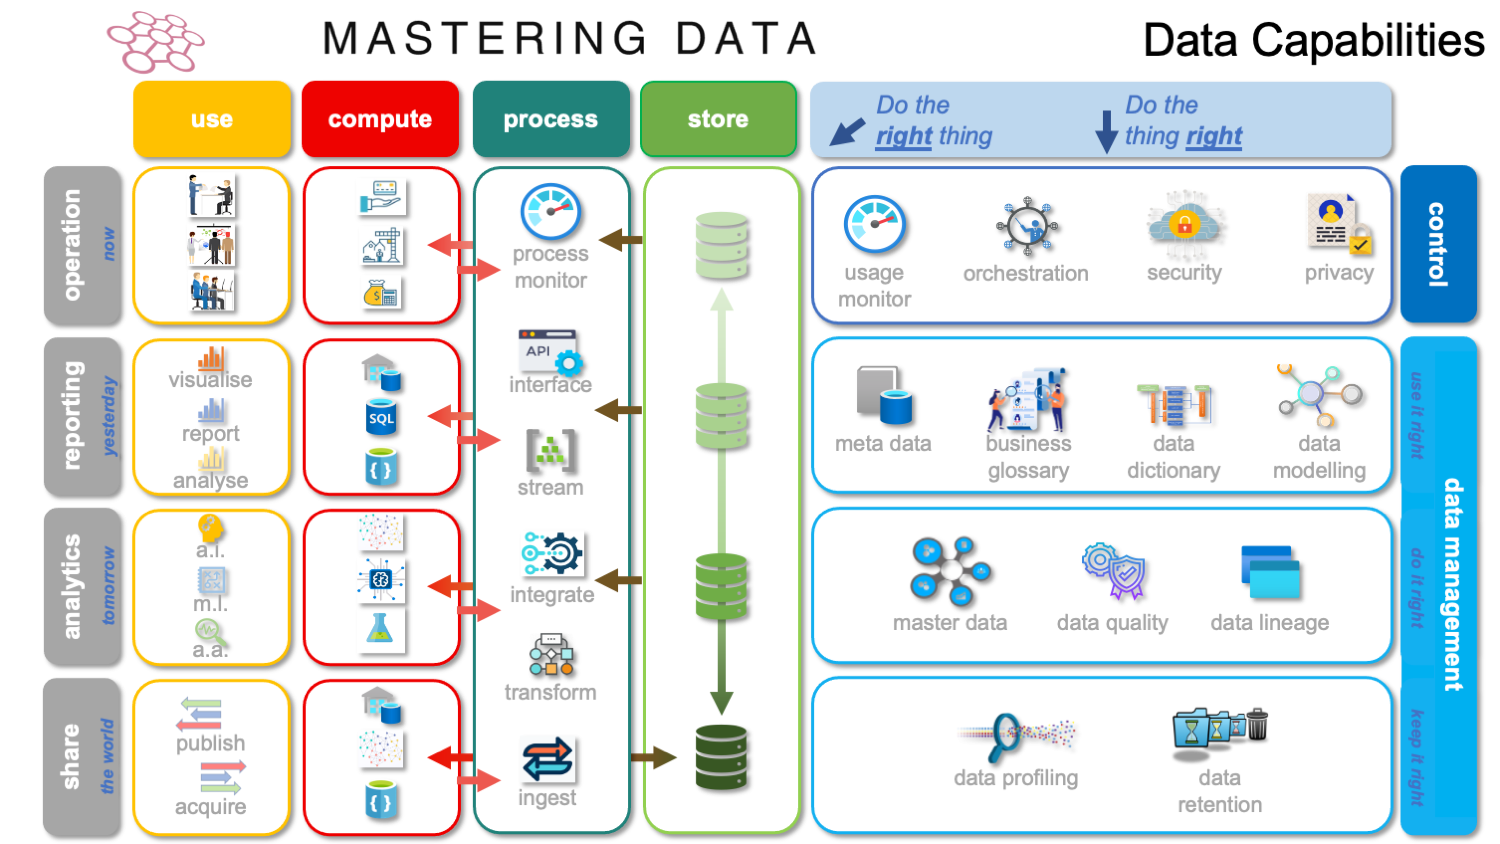 Data Capabilities as Linking Pin Between Business, IT and Data Management